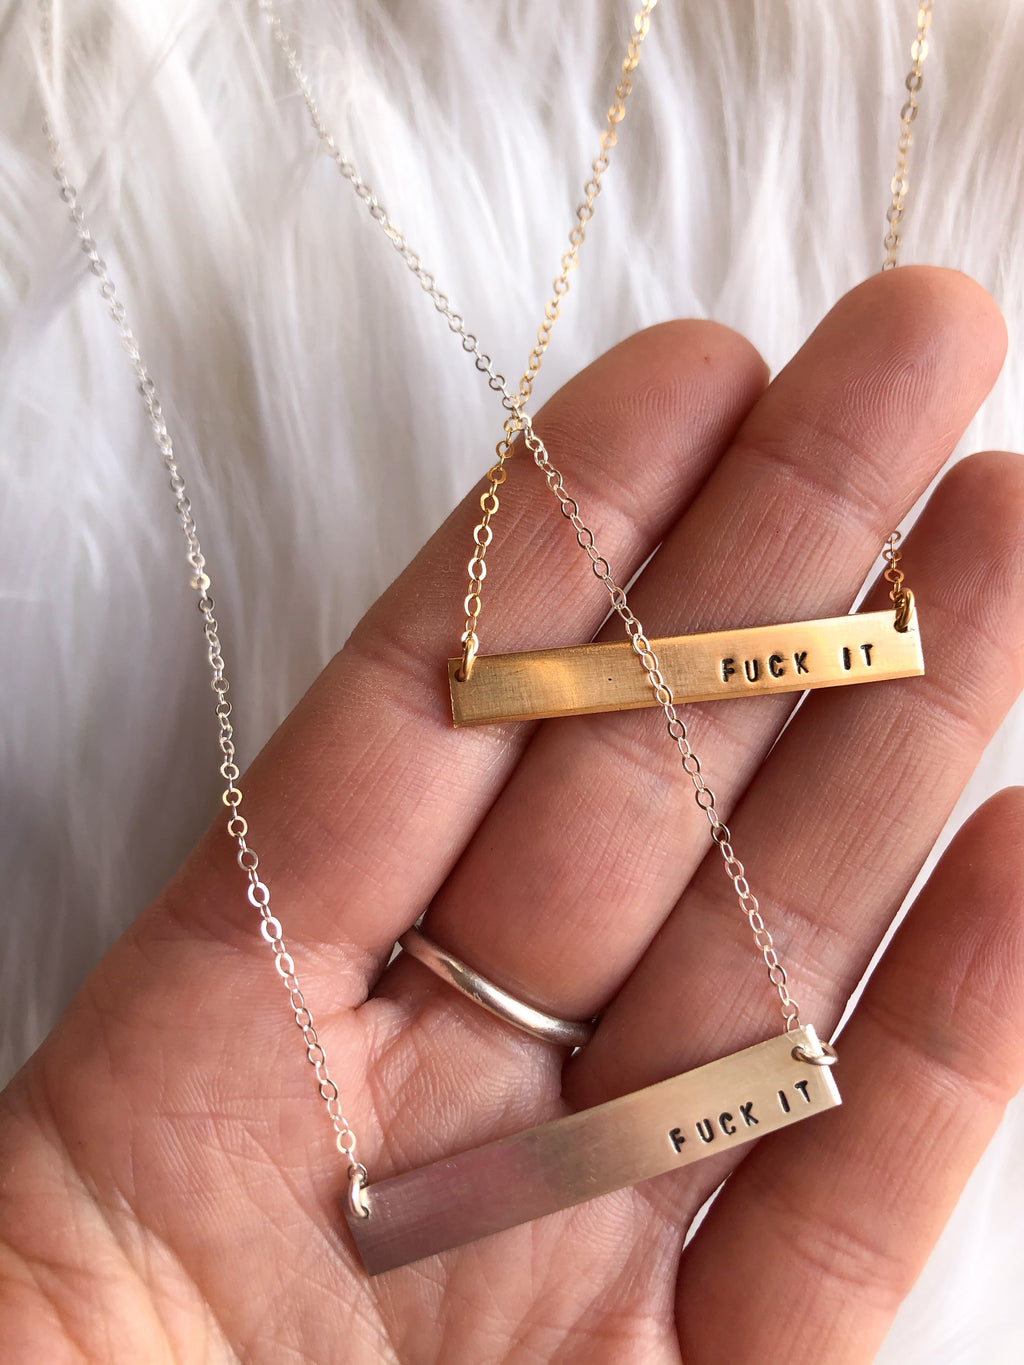 Fuck It Bar Necklace Gold Fill